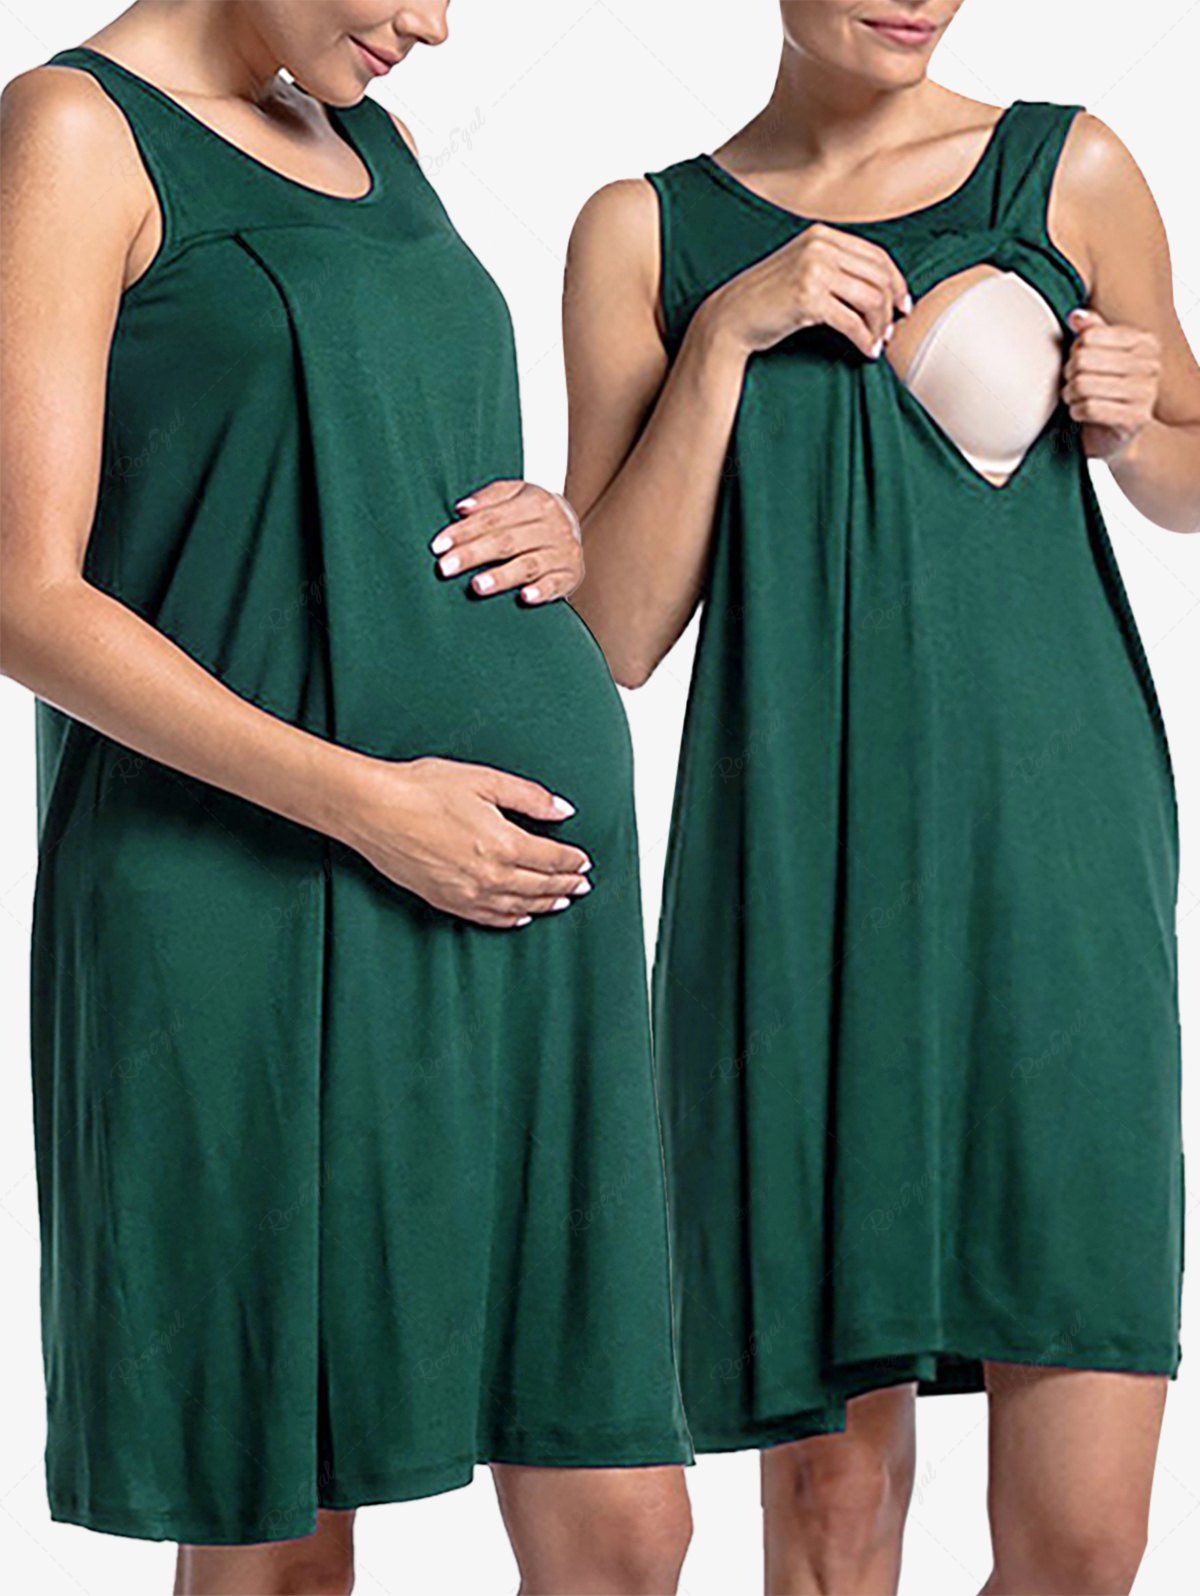 New Plus Size Sleeveless Solid Color Ripped Tank Maternity Nursing Dress  